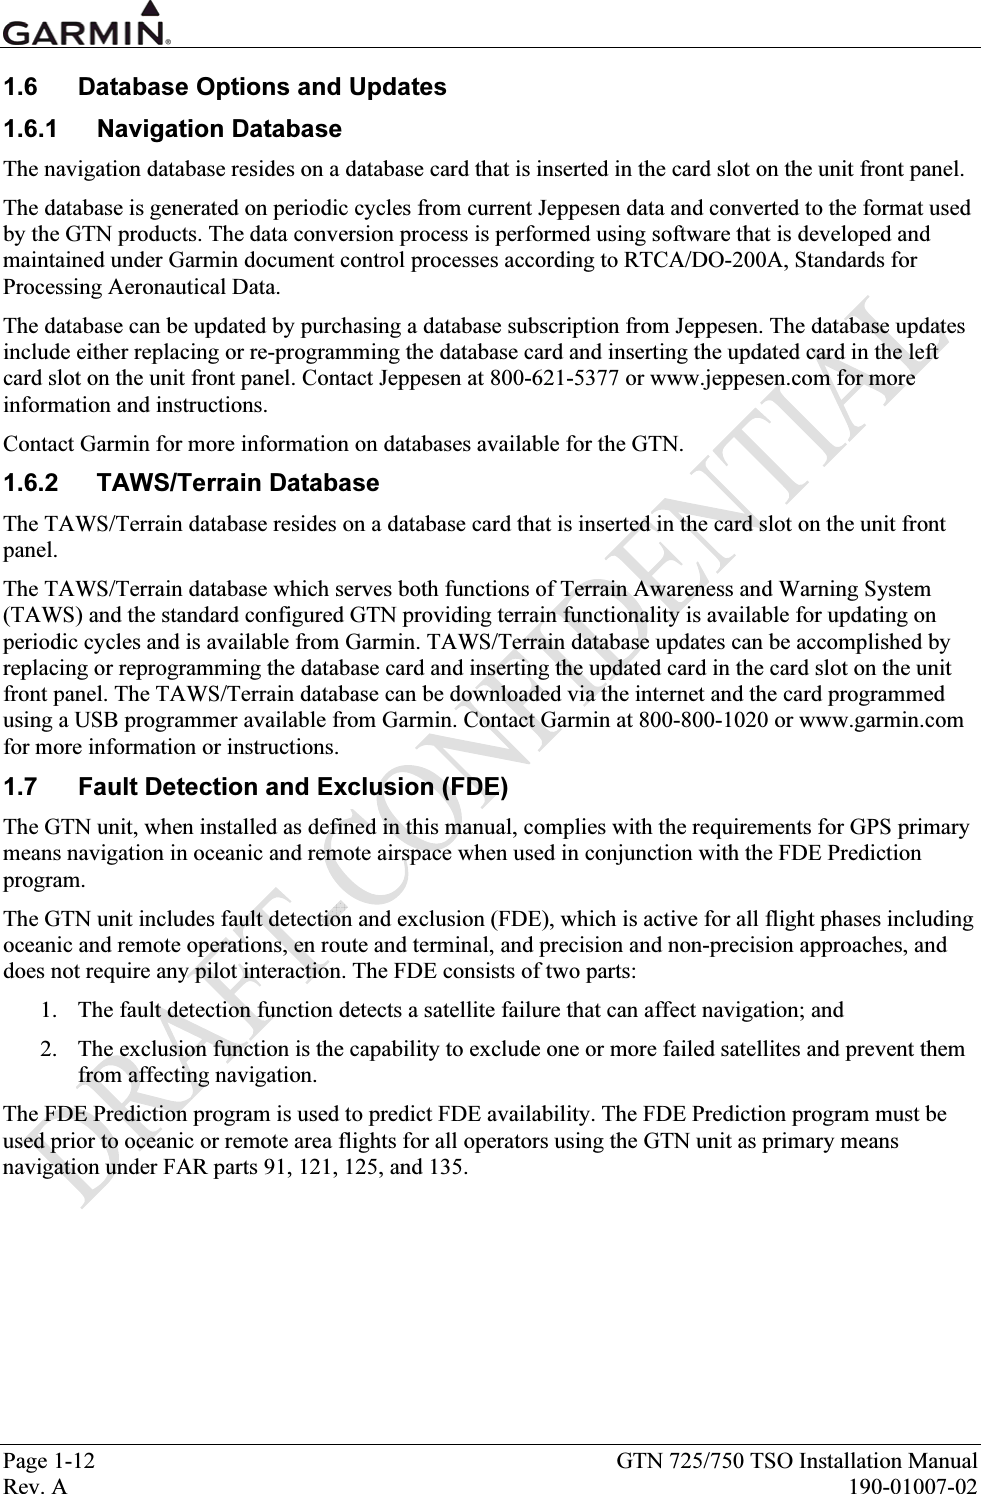  Page 1-12  GTN 725/750 TSO Installation Manual Rev. A  190-01007-02 1.6  Database Options and Updates 1.6.1 Navigation Database The navigation database resides on a database card that is inserted in the card slot on the unit front panel. The database is generated on periodic cycles from current Jeppesen data and converted to the format used by the GTN products. The data conversion process is performed using software that is developed and maintained under Garmin document control processes according to RTCA/DO-200A, Standards for Processing Aeronautical Data. The database can be updated by purchasing a database subscription from Jeppesen. The database updates include either replacing or re-programming the database card and inserting the updated card in the left card slot on the unit front panel. Contact Jeppesen at 800-621-5377 or www.jeppesen.com for more information and instructions. Contact Garmin for more information on databases available for the GTN. 1.6.2 TAWS/Terrain Database The TAWS/Terrain database resides on a database card that is inserted in the card slot on the unit front panel. The TAWS/Terrain database which serves both functions of Terrain Awareness and Warning System (TAWS) and the standard configured GTN providing terrain functionality is available for updating on periodic cycles and is available from Garmin. TAWS/Terrain database updates can be accomplished by replacing or reprogramming the database card and inserting the updated card in the card slot on the unit front panel. The TAWS/Terrain database can be downloaded via the internet and the card programmed using a USB programmer available from Garmin. Contact Garmin at 800-800-1020 or www.garmin.com for more information or instructions. 1.7  Fault Detection and Exclusion (FDE) The GTN unit, when installed as defined in this manual, complies with the requirements for GPS primary means navigation in oceanic and remote airspace when used in conjunction with the FDE Prediction program. The GTN unit includes fault detection and exclusion (FDE), which is active for all flight phases including oceanic and remote operations, en route and terminal, and precision and non-precision approaches, and does not require any pilot interaction. The FDE consists of two parts: 1. The fault detection function detects a satellite failure that can affect navigation; and 2. The exclusion function is the capability to exclude one or more failed satellites and prevent them from affecting navigation. The FDE Prediction program is used to predict FDE availability. The FDE Prediction program must be used prior to oceanic or remote area flights for all operators using the GTN unit as primary means navigation under FAR parts 91, 121, 125, and 135. 